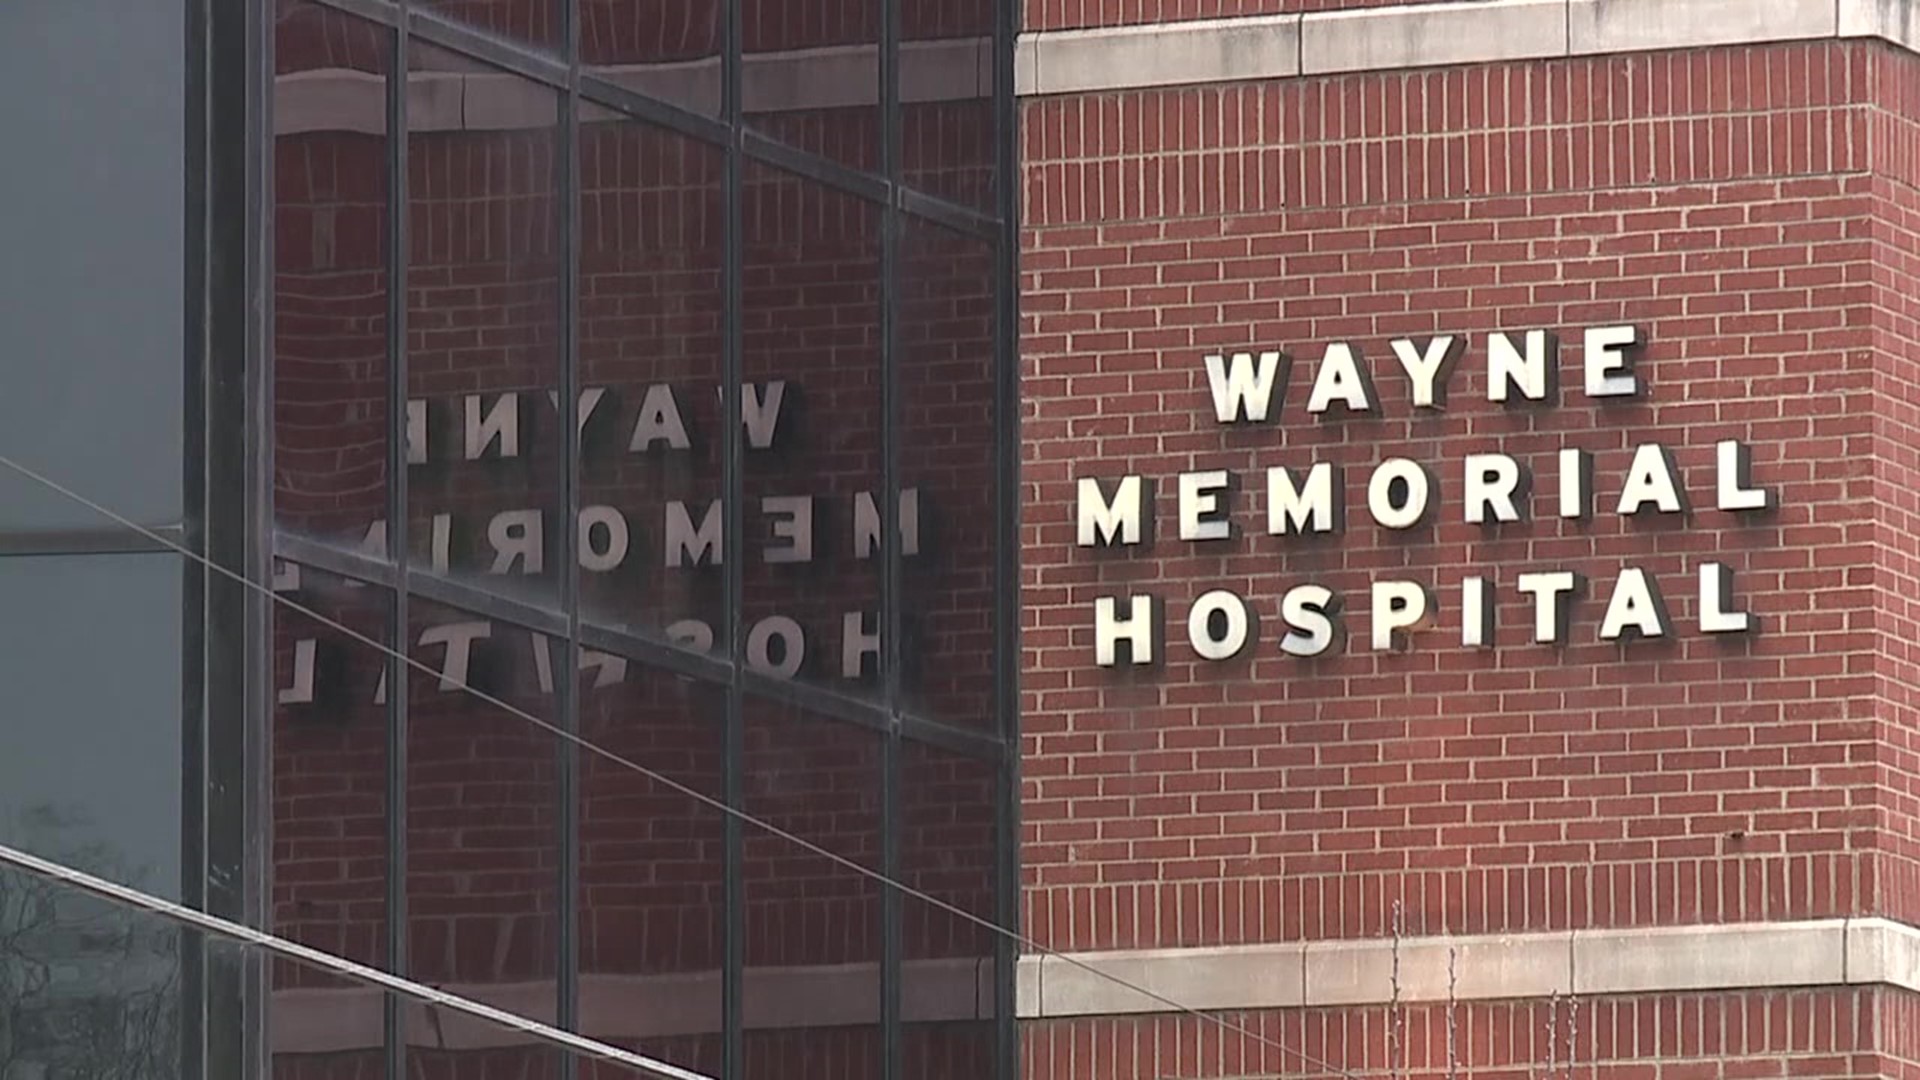 At Wayne Memorial Hospital and Guthrie Hospital System, people can once again visit patients due to the decline in COVID cases.